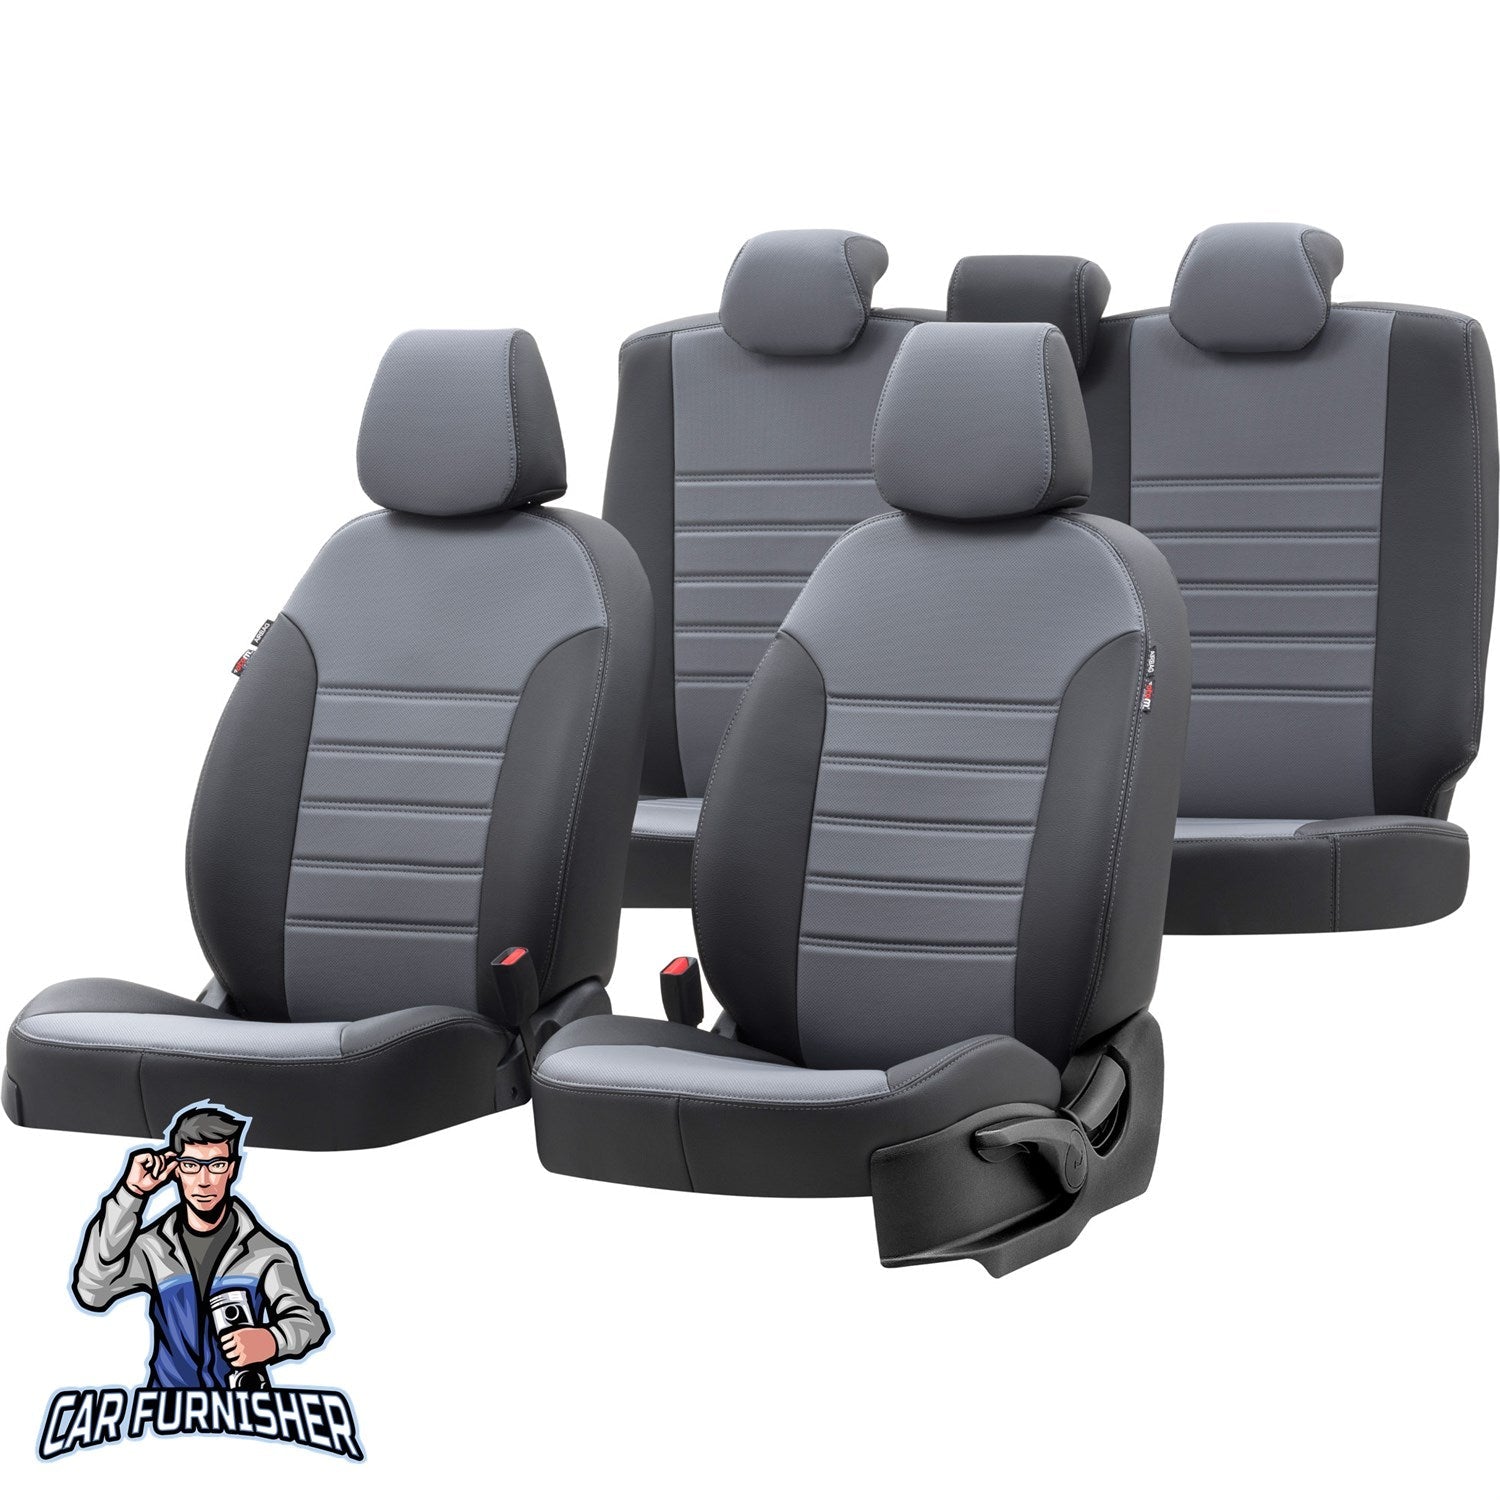 Renault Zoe Car Seat Covers 2019-2023 Istanbul Design Smoked Black Full Set (5 Seats + Handrest) Leather & Fabric